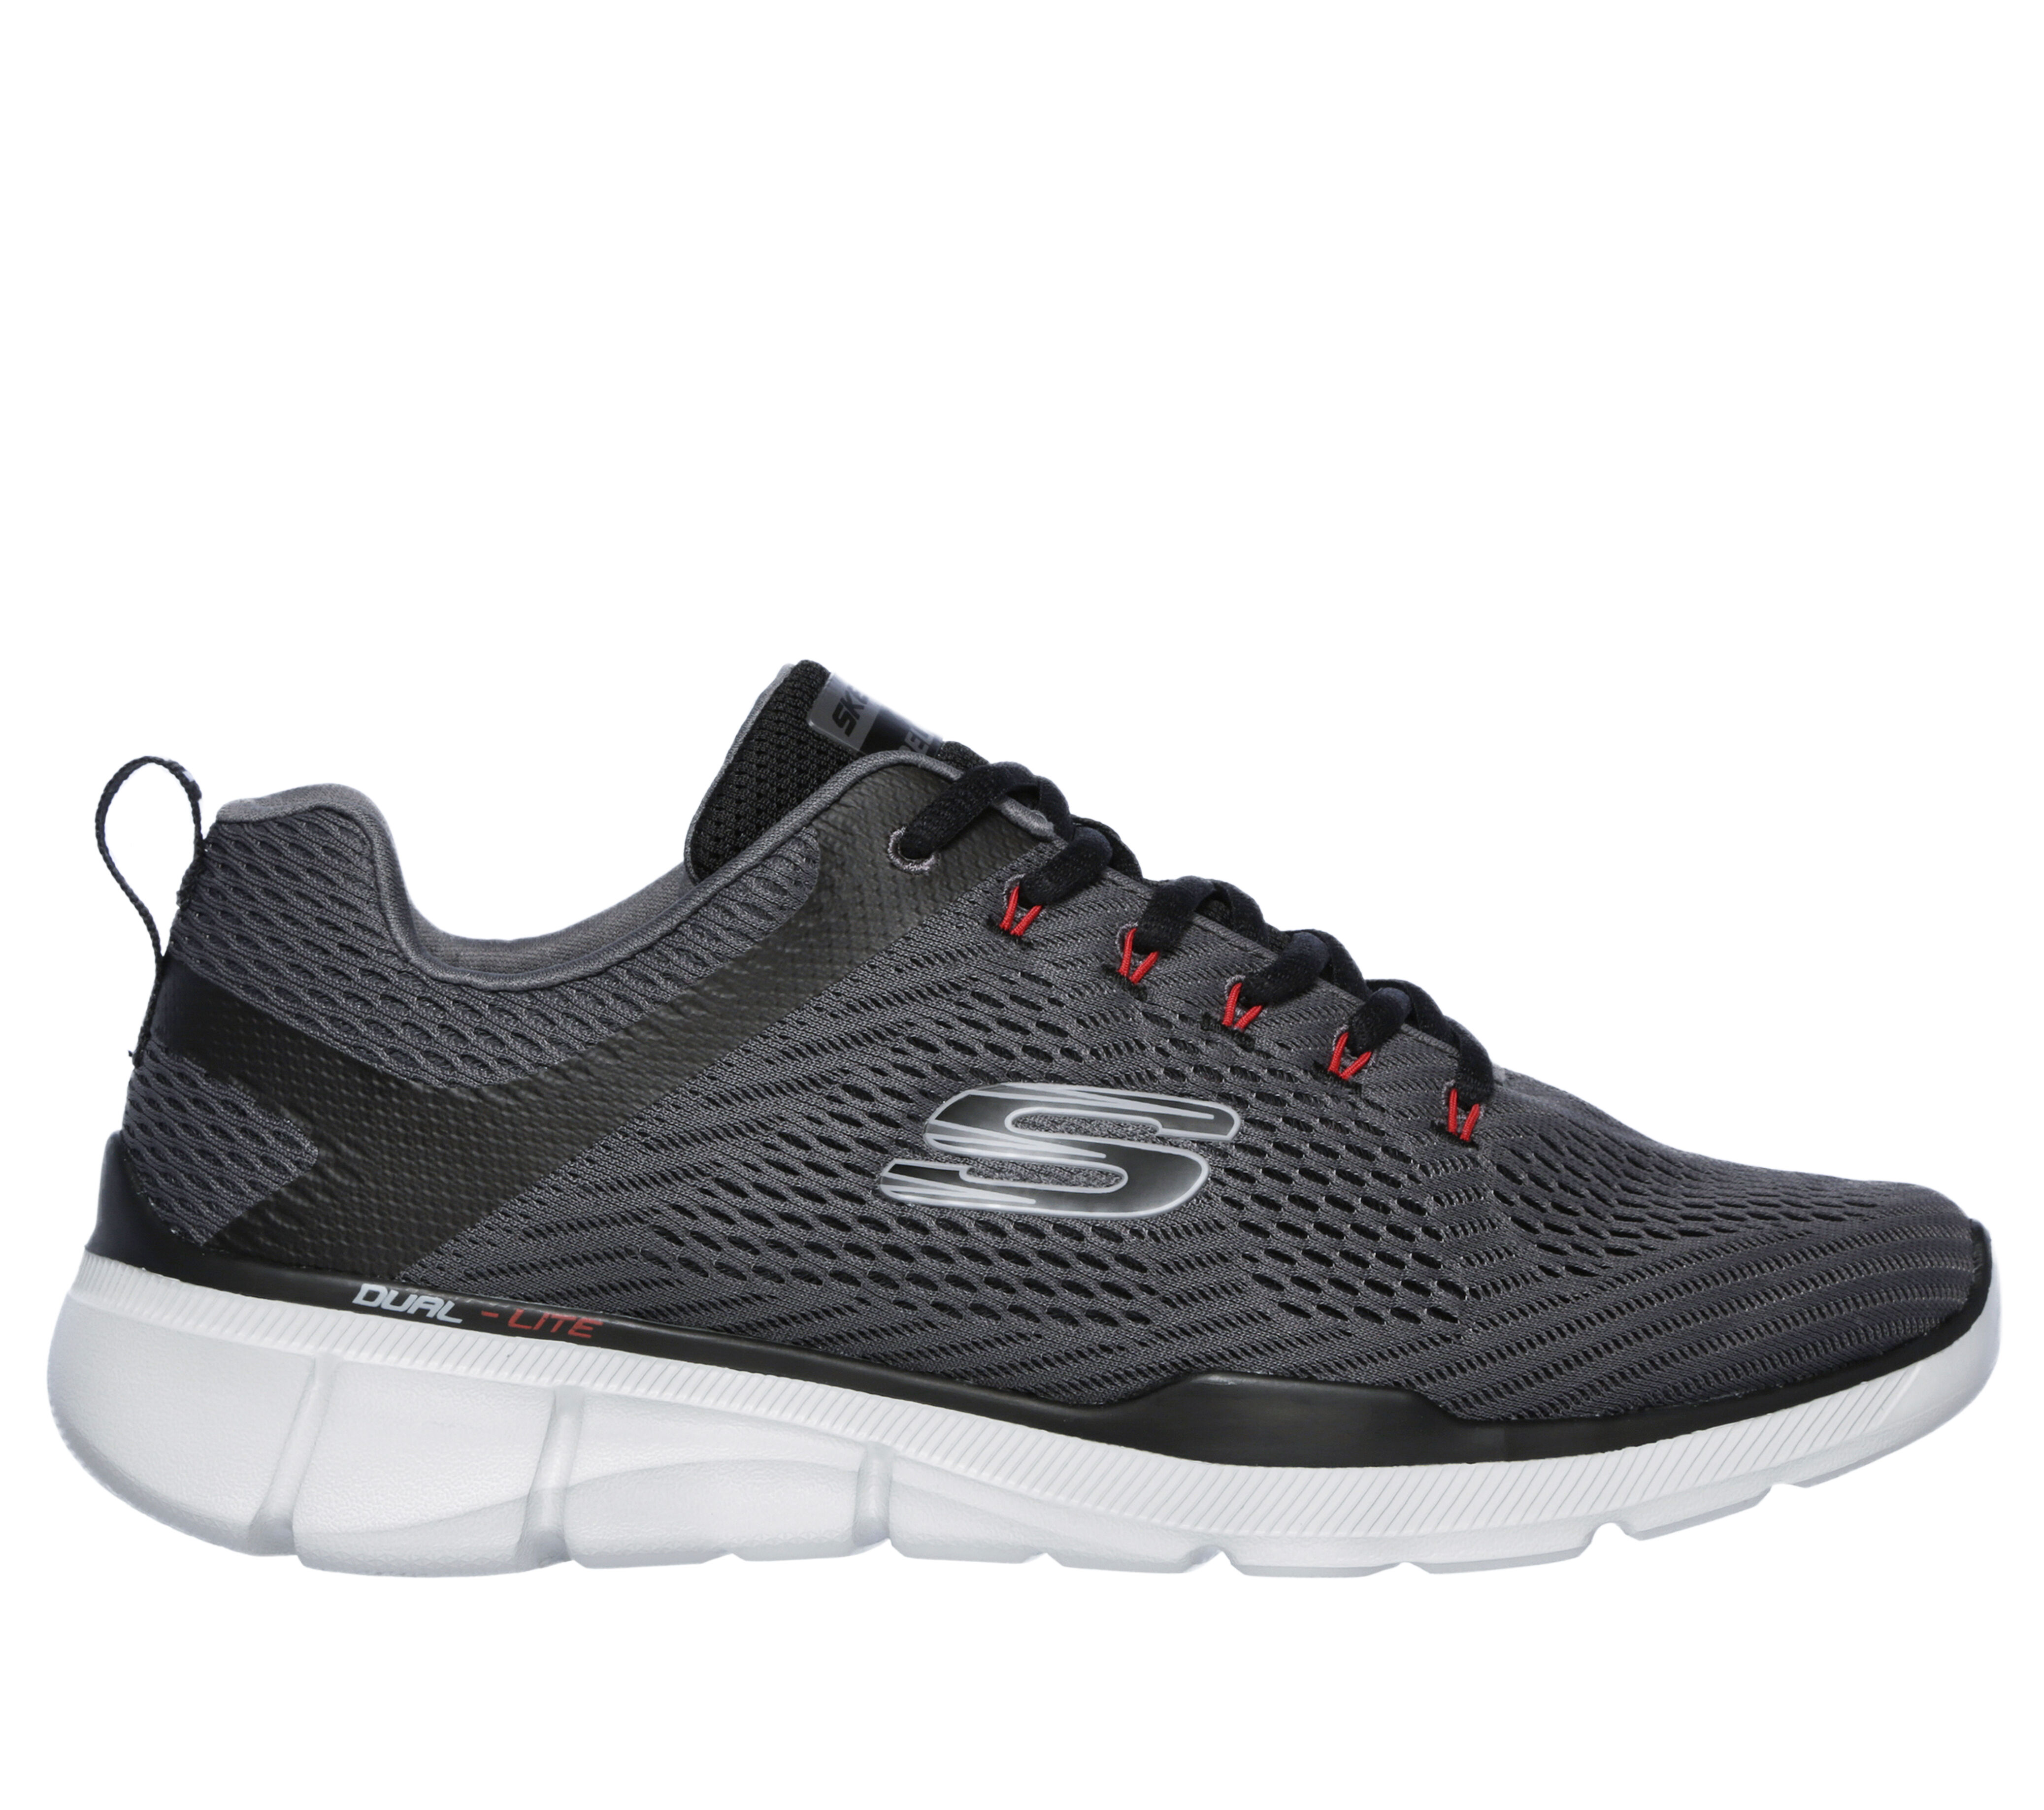 Skechers Review on Sale, SAVE